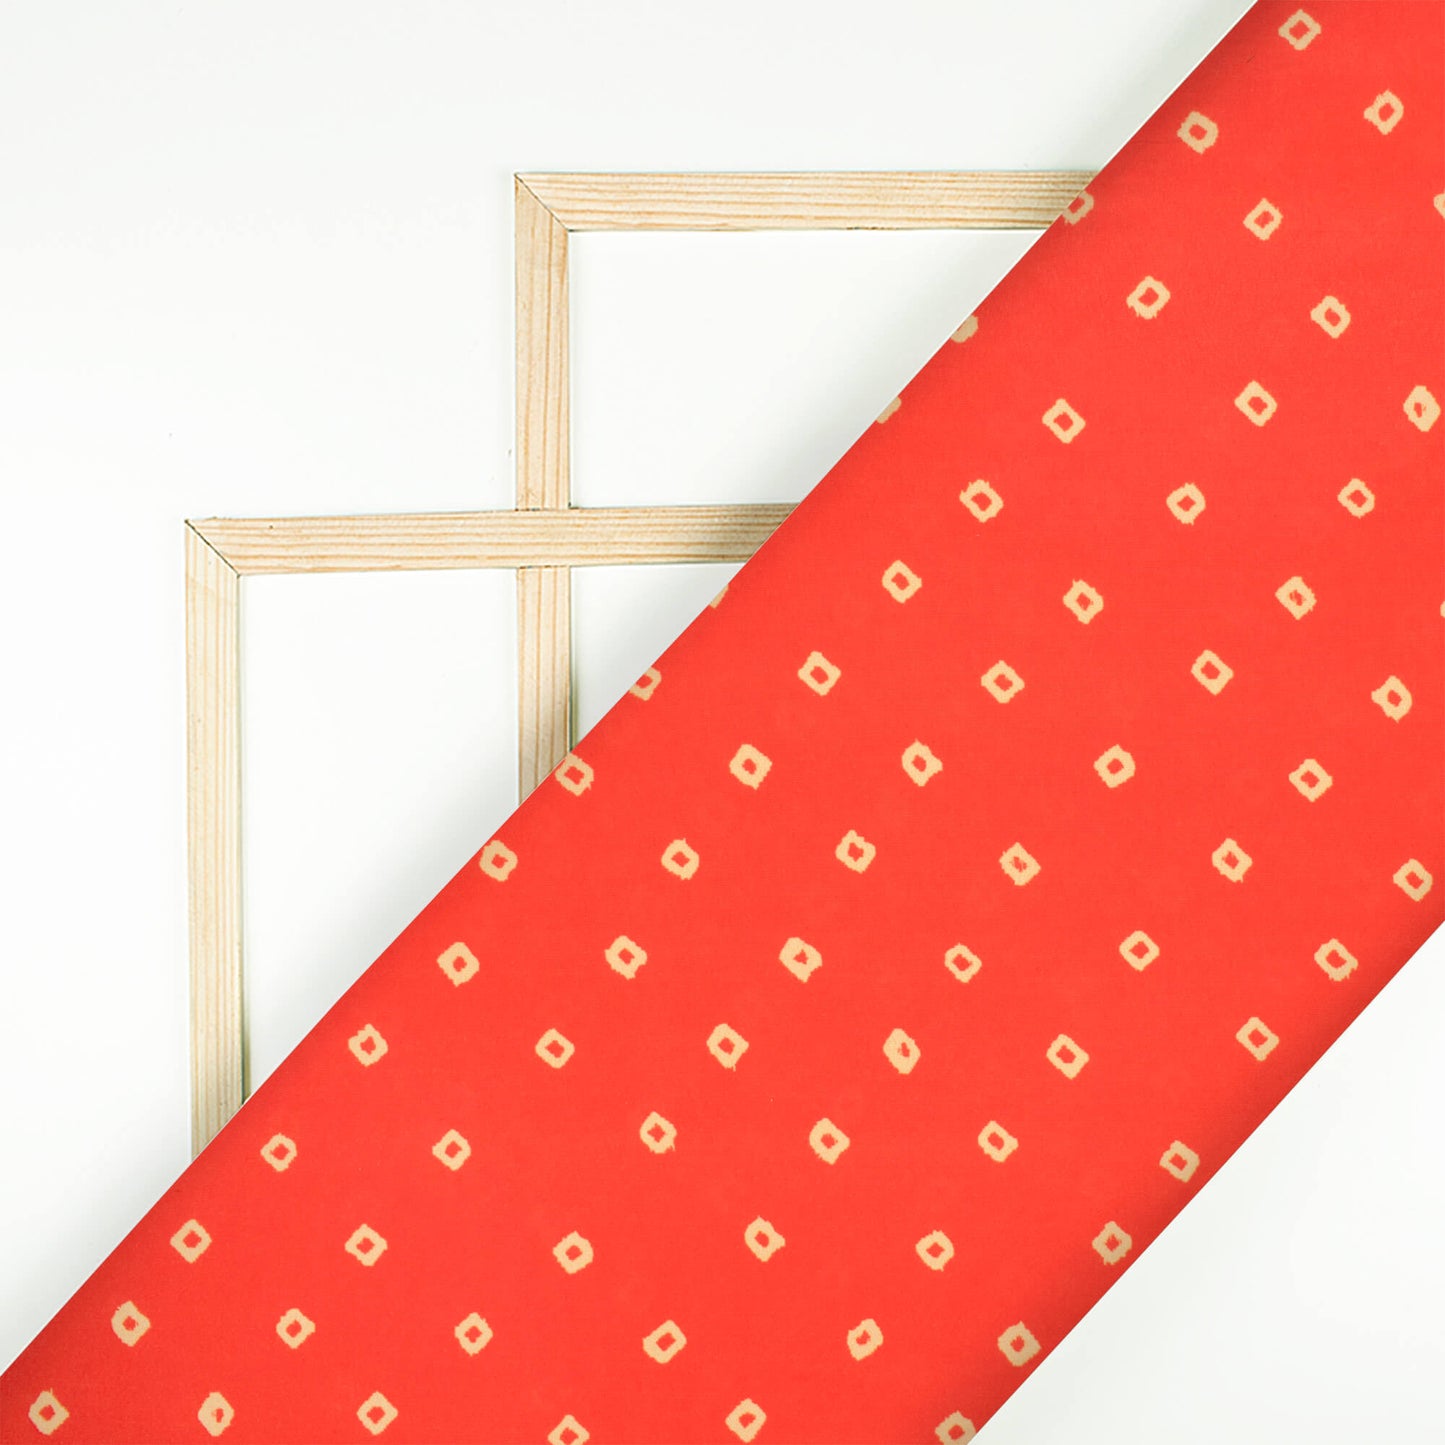 Fire Orange And Cream Bandhani Pattern Digital Print French Crepe Fabric - Fabcurate